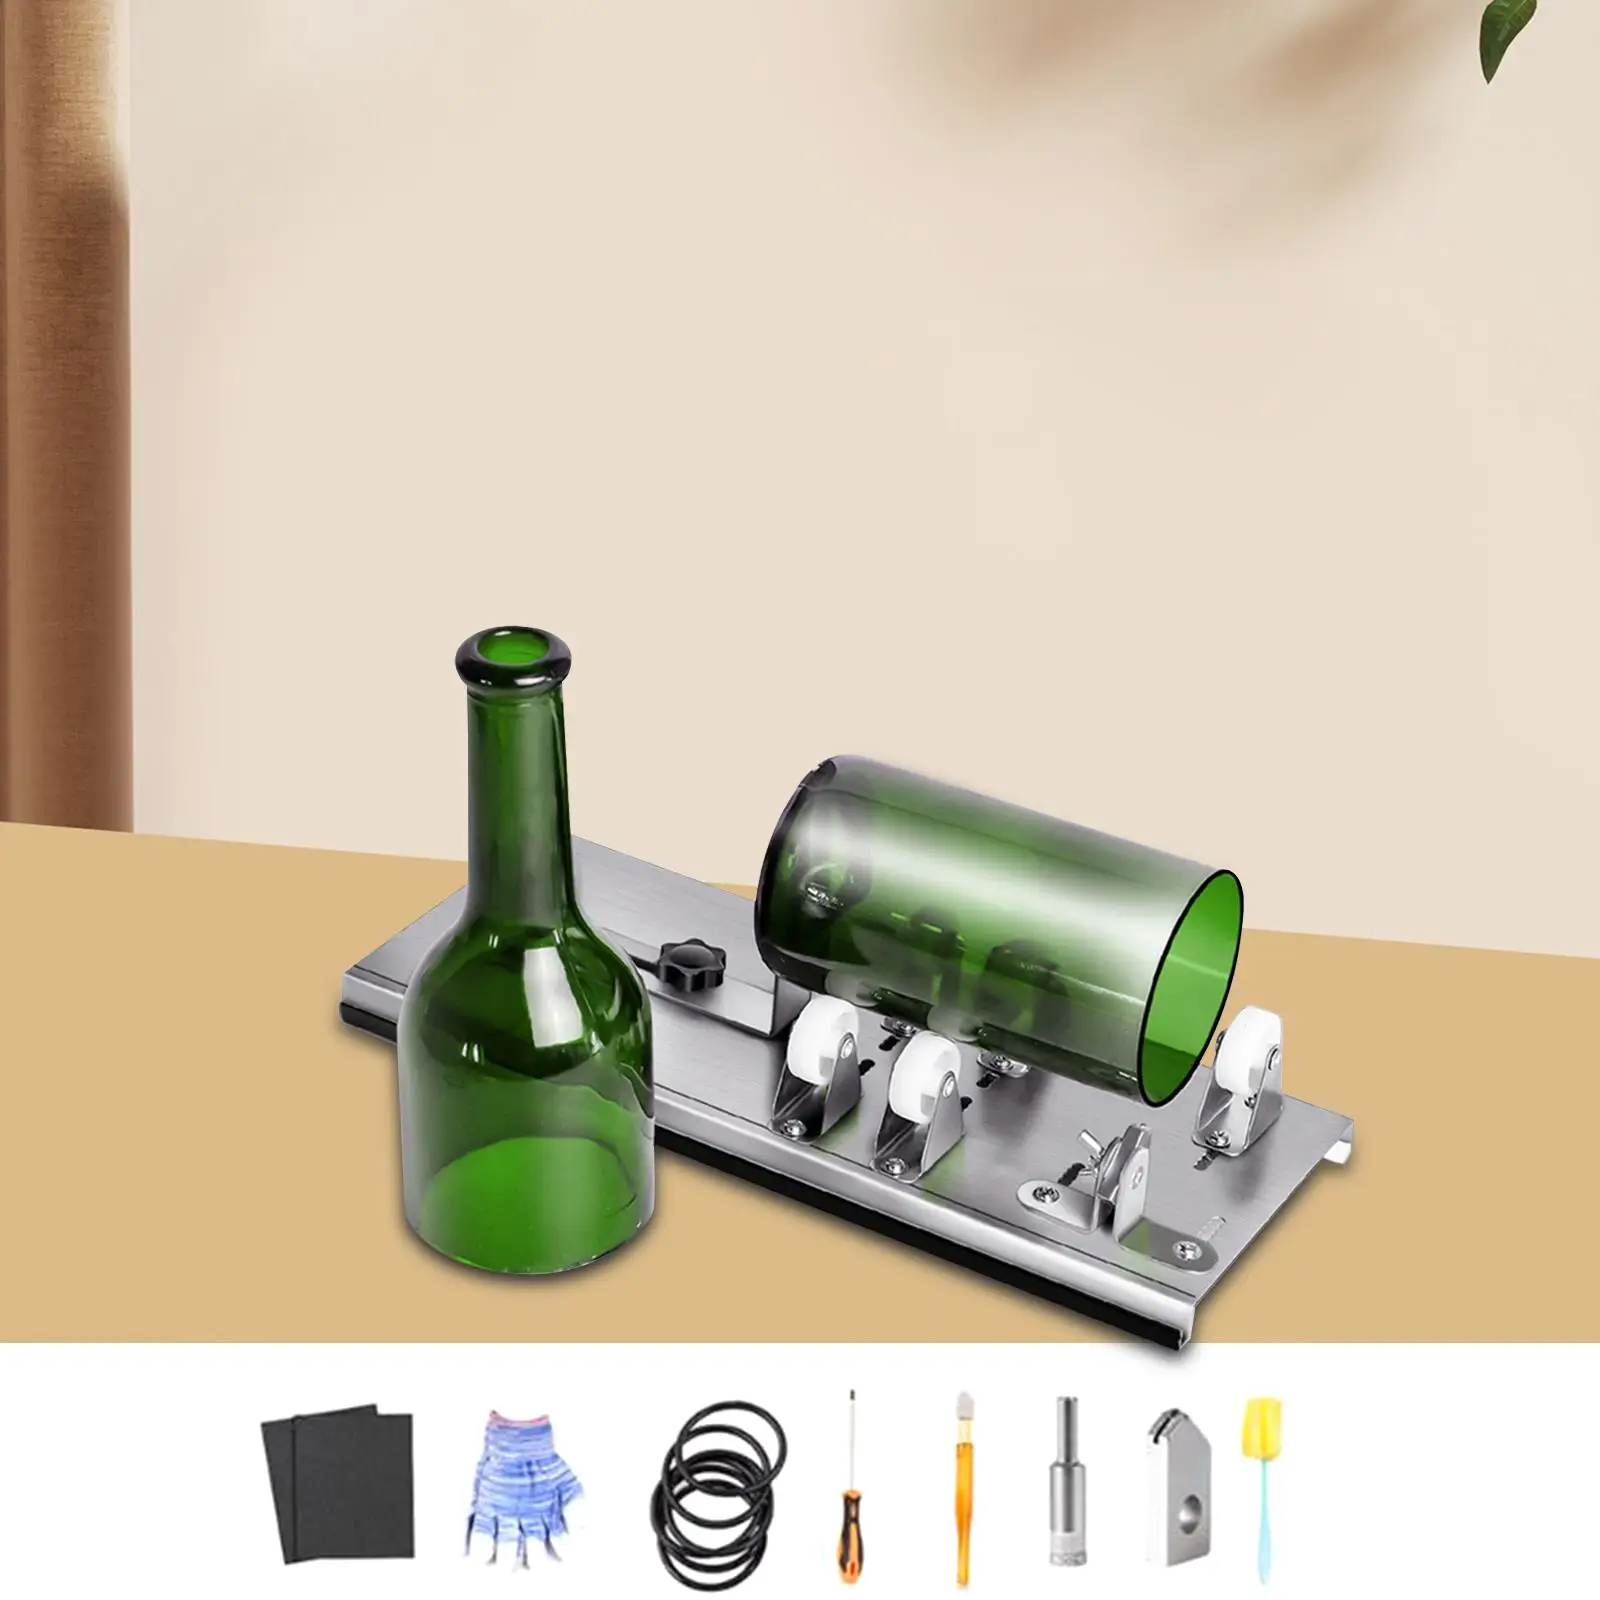 Glass Bottle Cutter Crafts Electric Durable Portable Cutting Machine for DIY Flowerpot Pen Holders Vases Candle Holders Decor